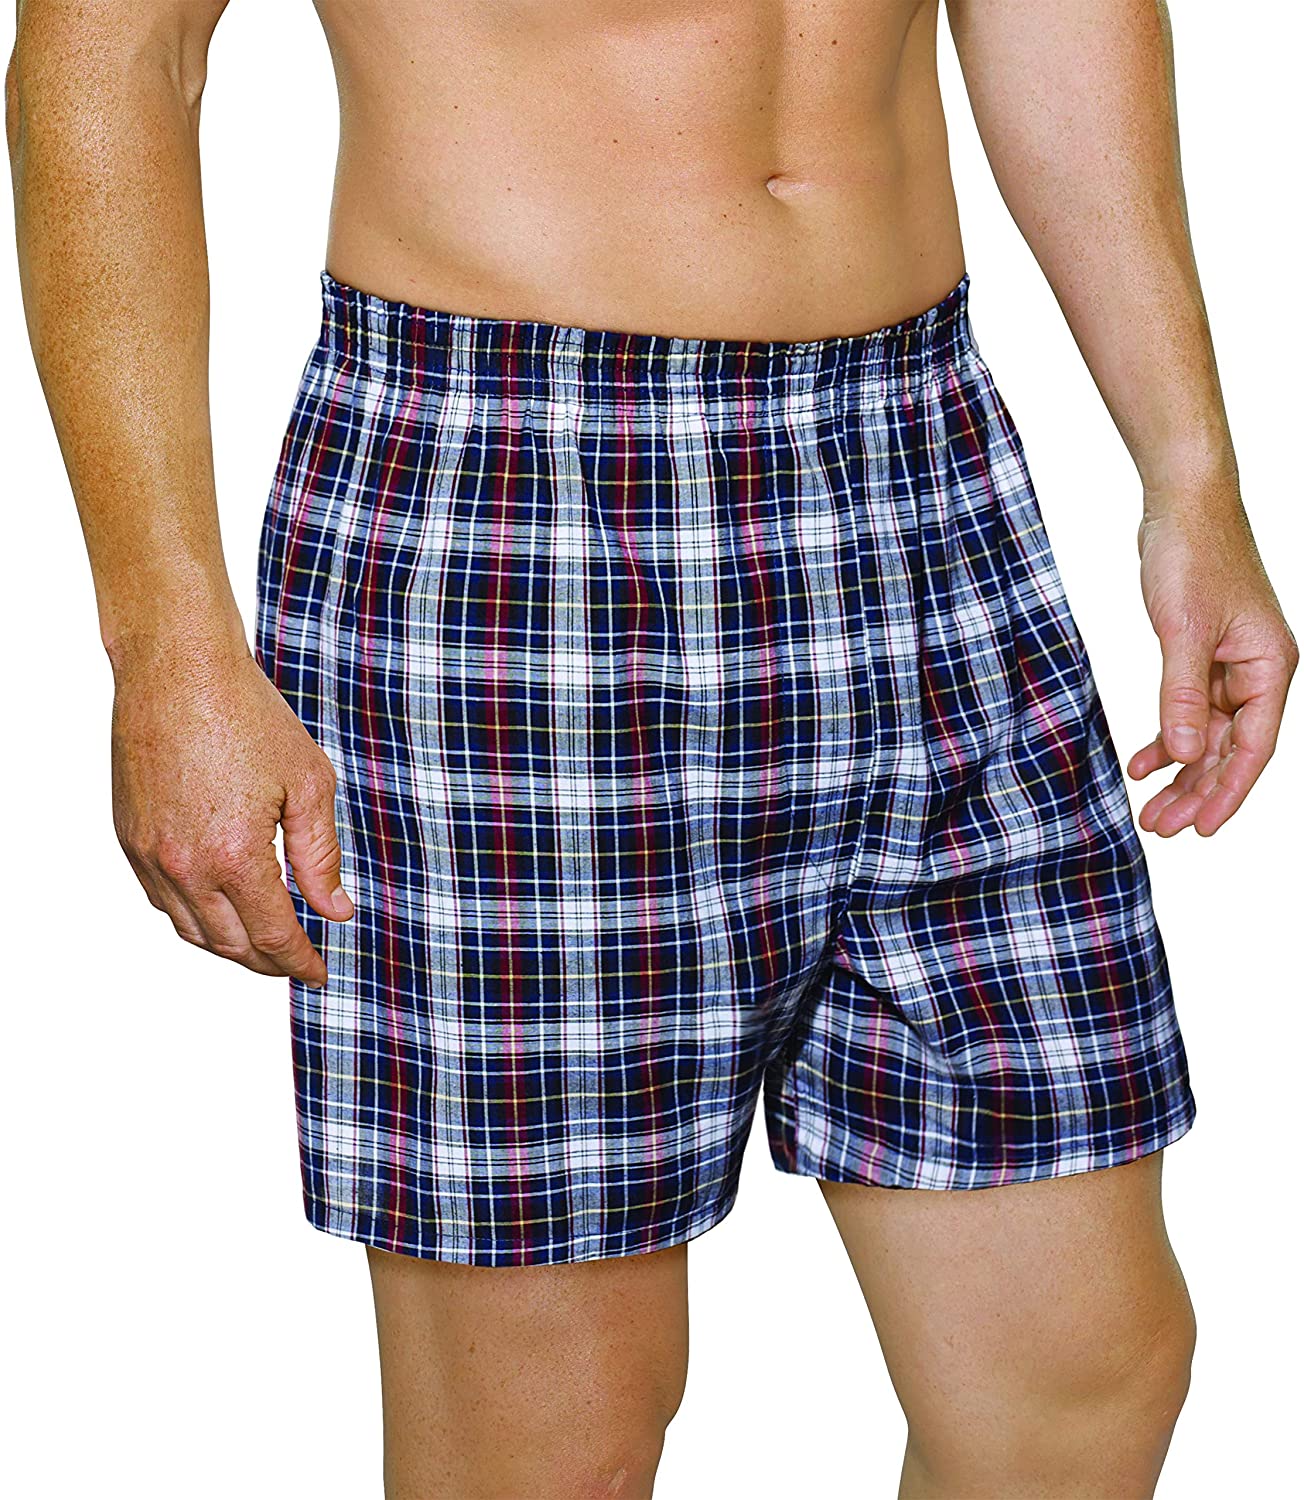 Fruit of the Loom Men's Tag-Free Boxer Shorts (Knit & Woven) | eBay